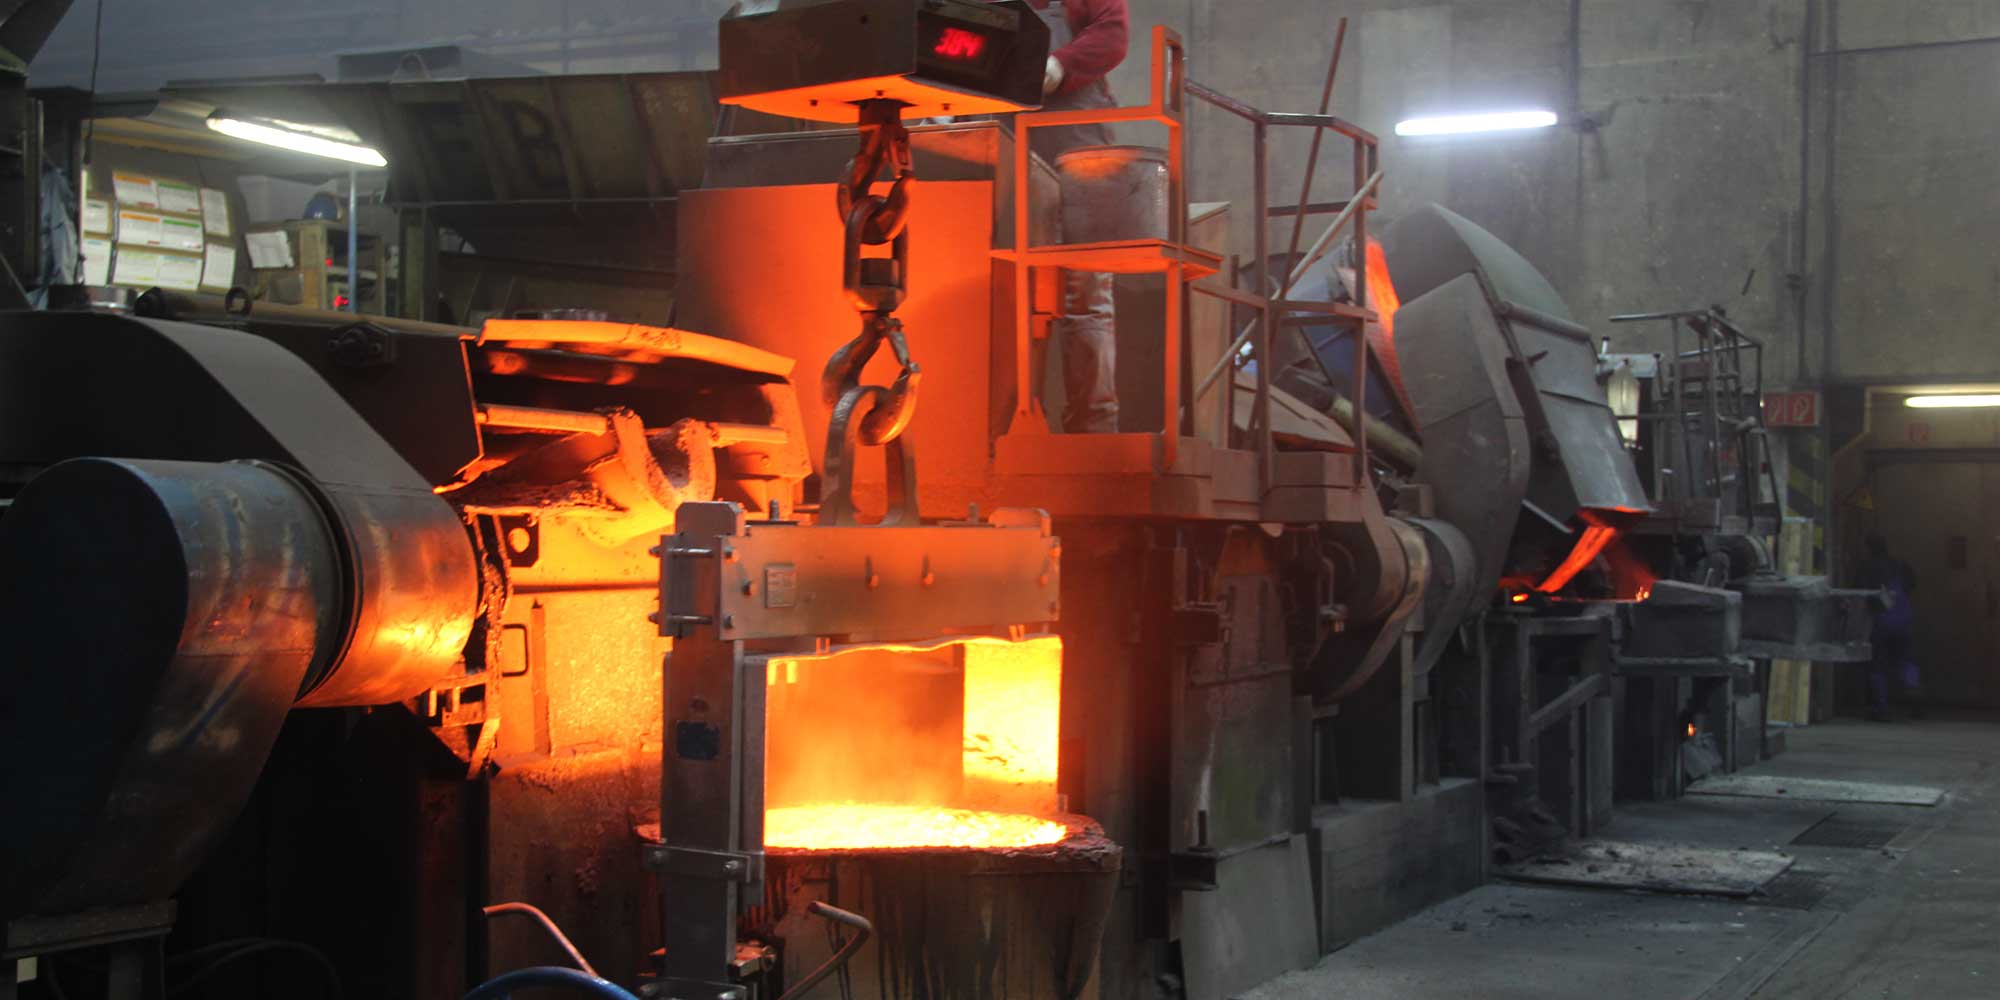 At the casting furnace